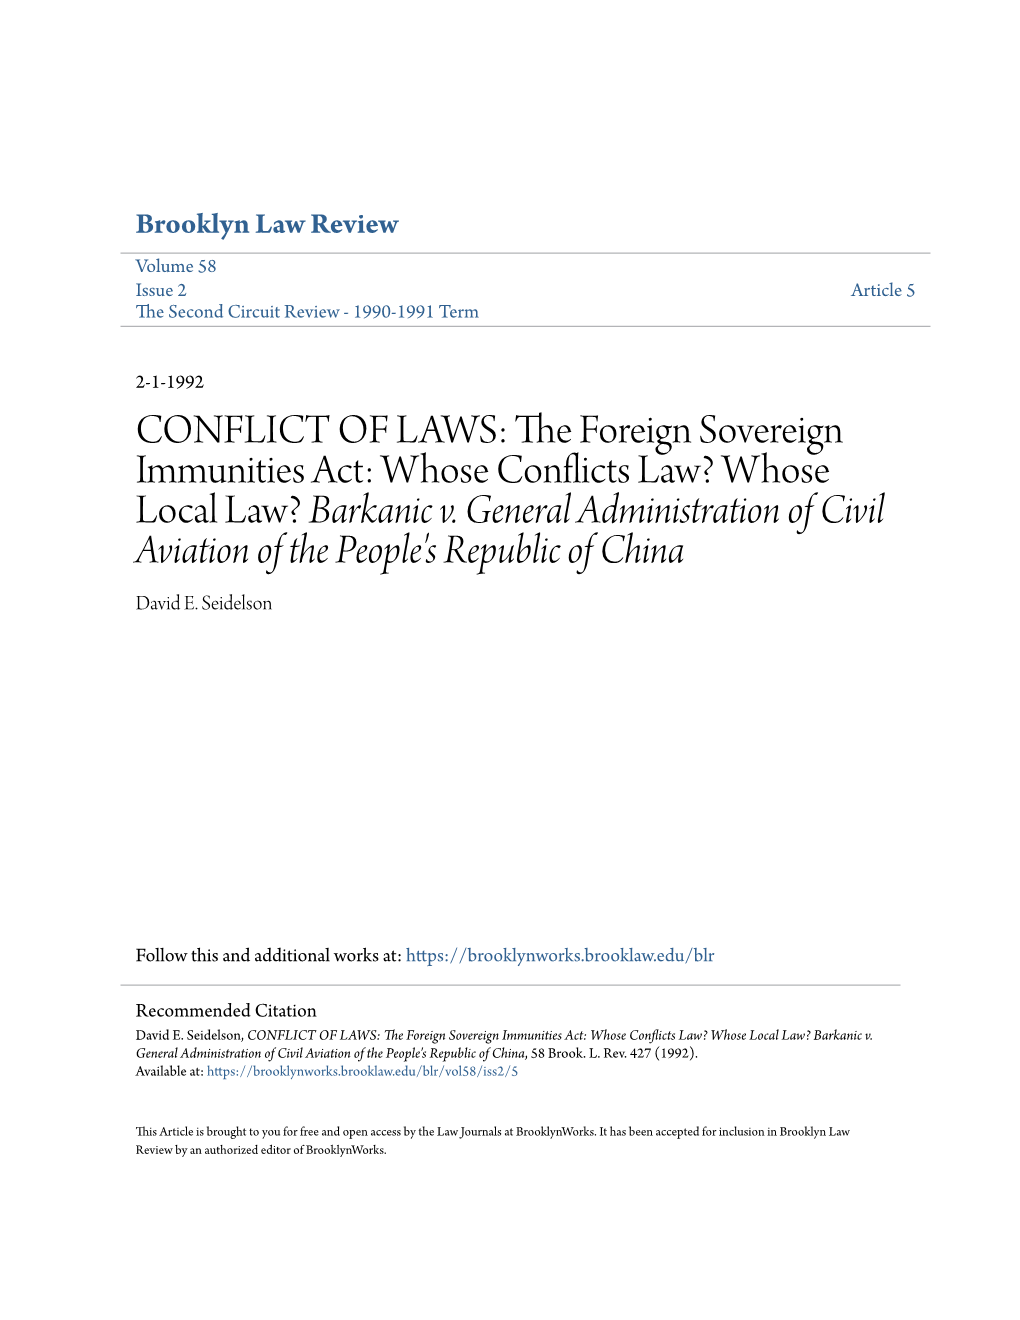 The Foreign Sovereign Immunities Act: Whose Conflicts Law? Whose Local Law? Barkanic V